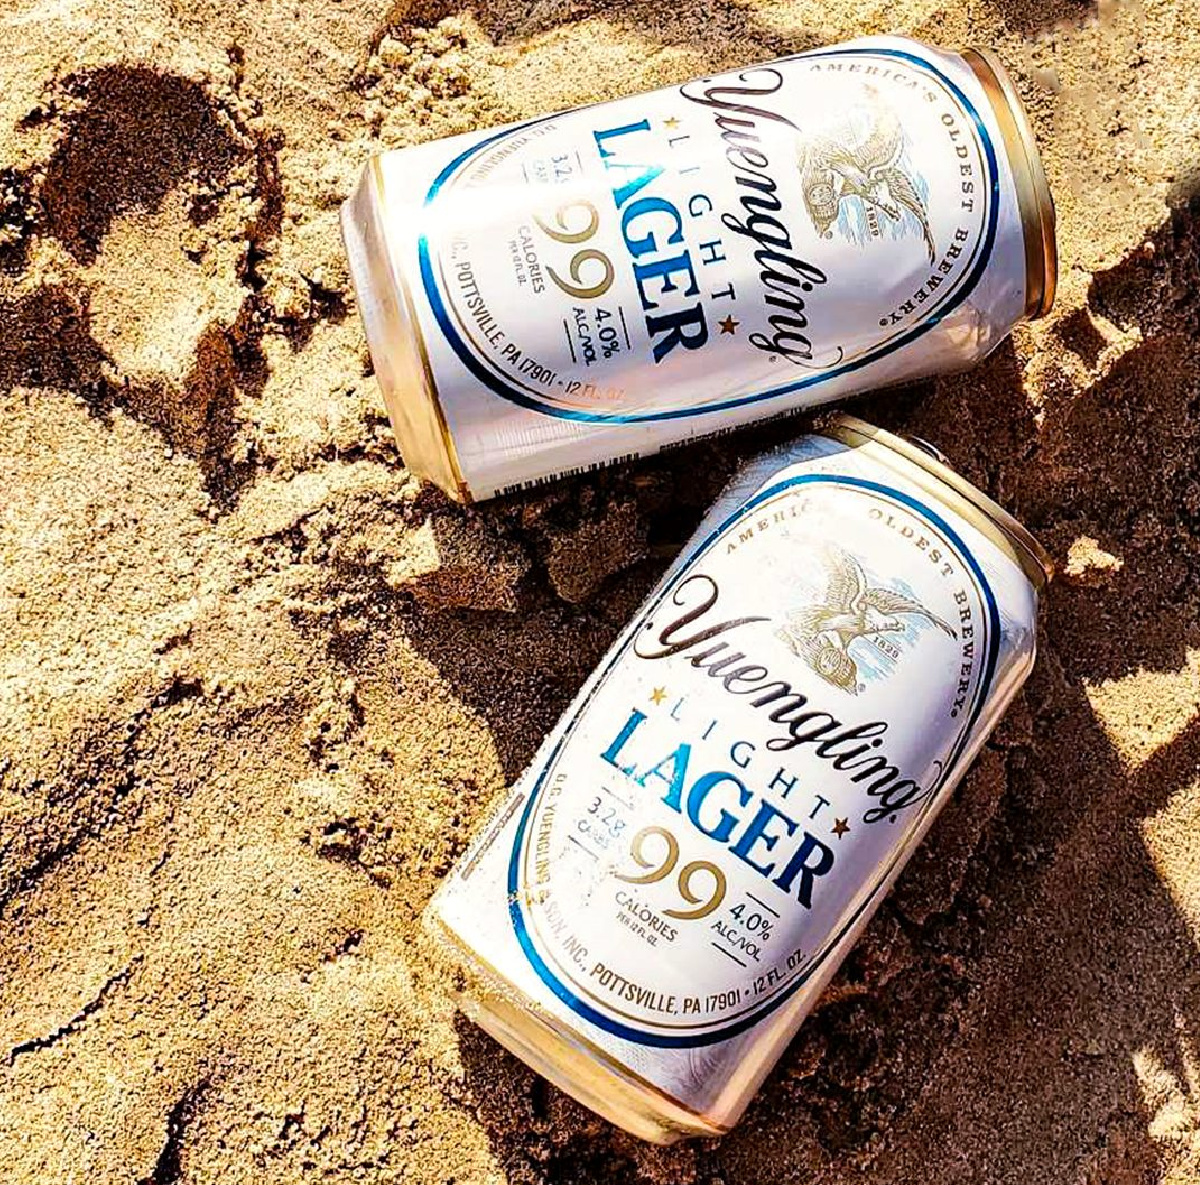 Keto friendly beer Yuengling Light Lager in cans on the beach